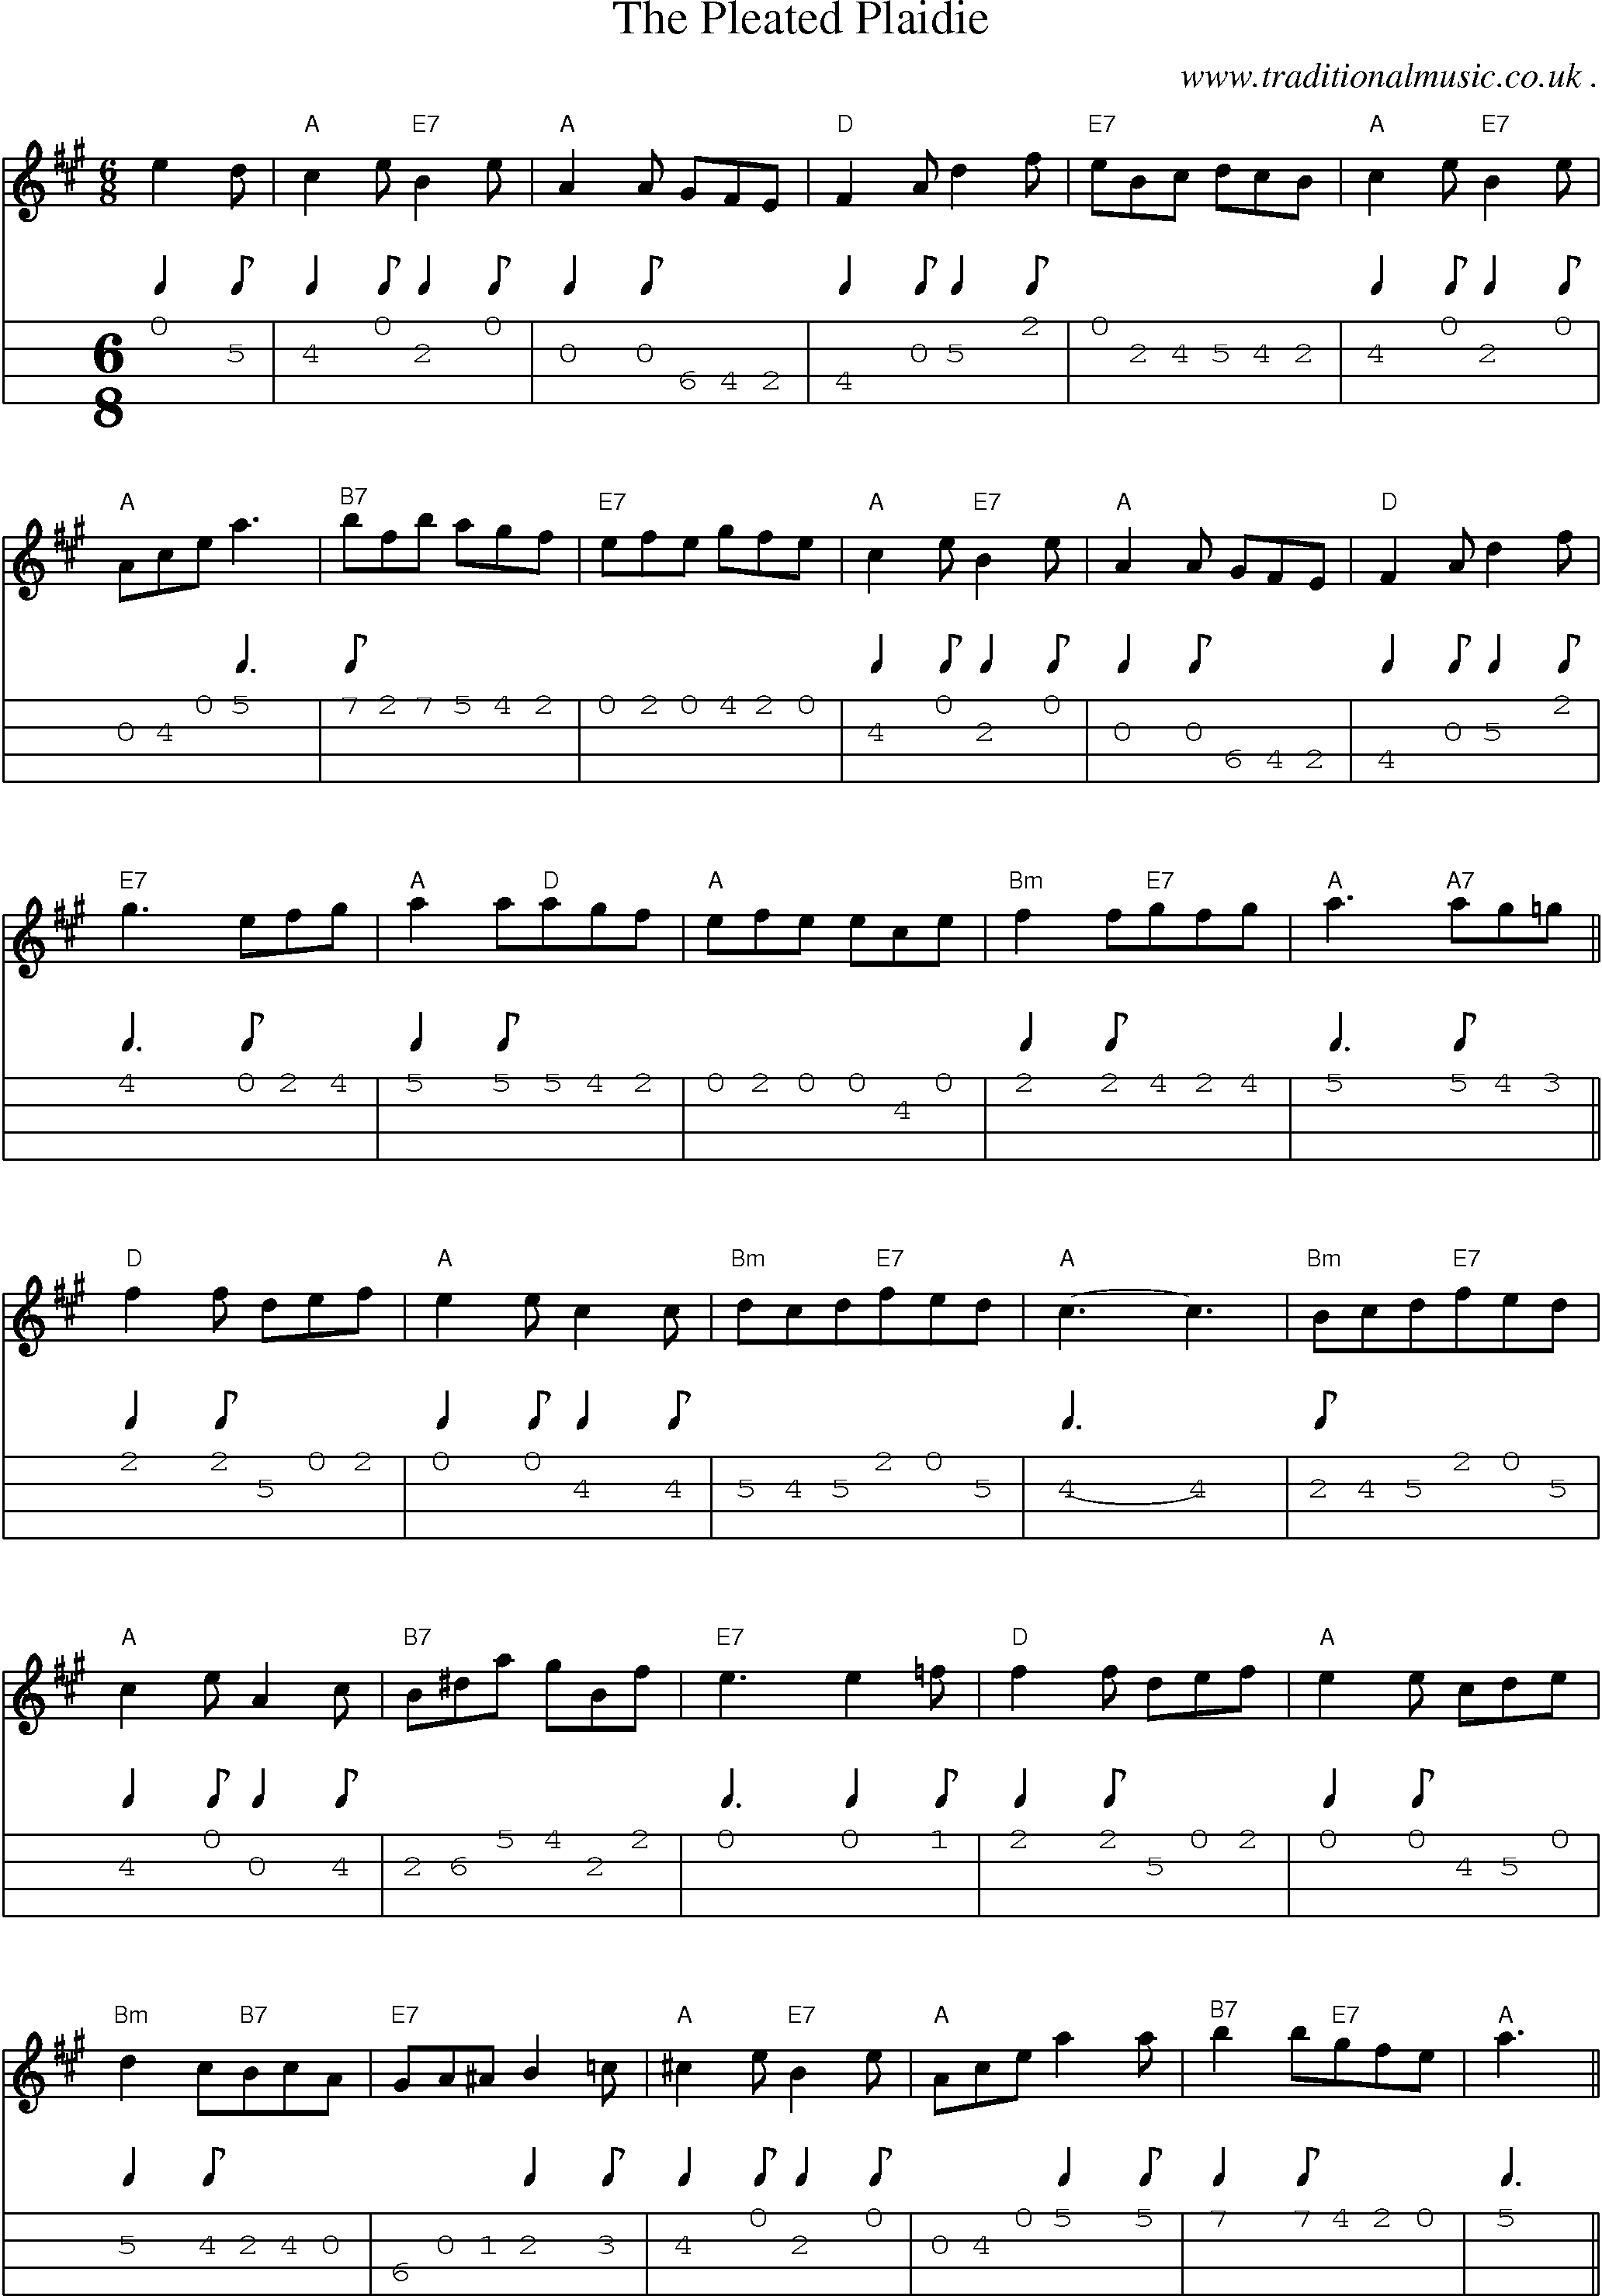 Sheet-Music and Mandolin Tabs for The Pleated Plaidie